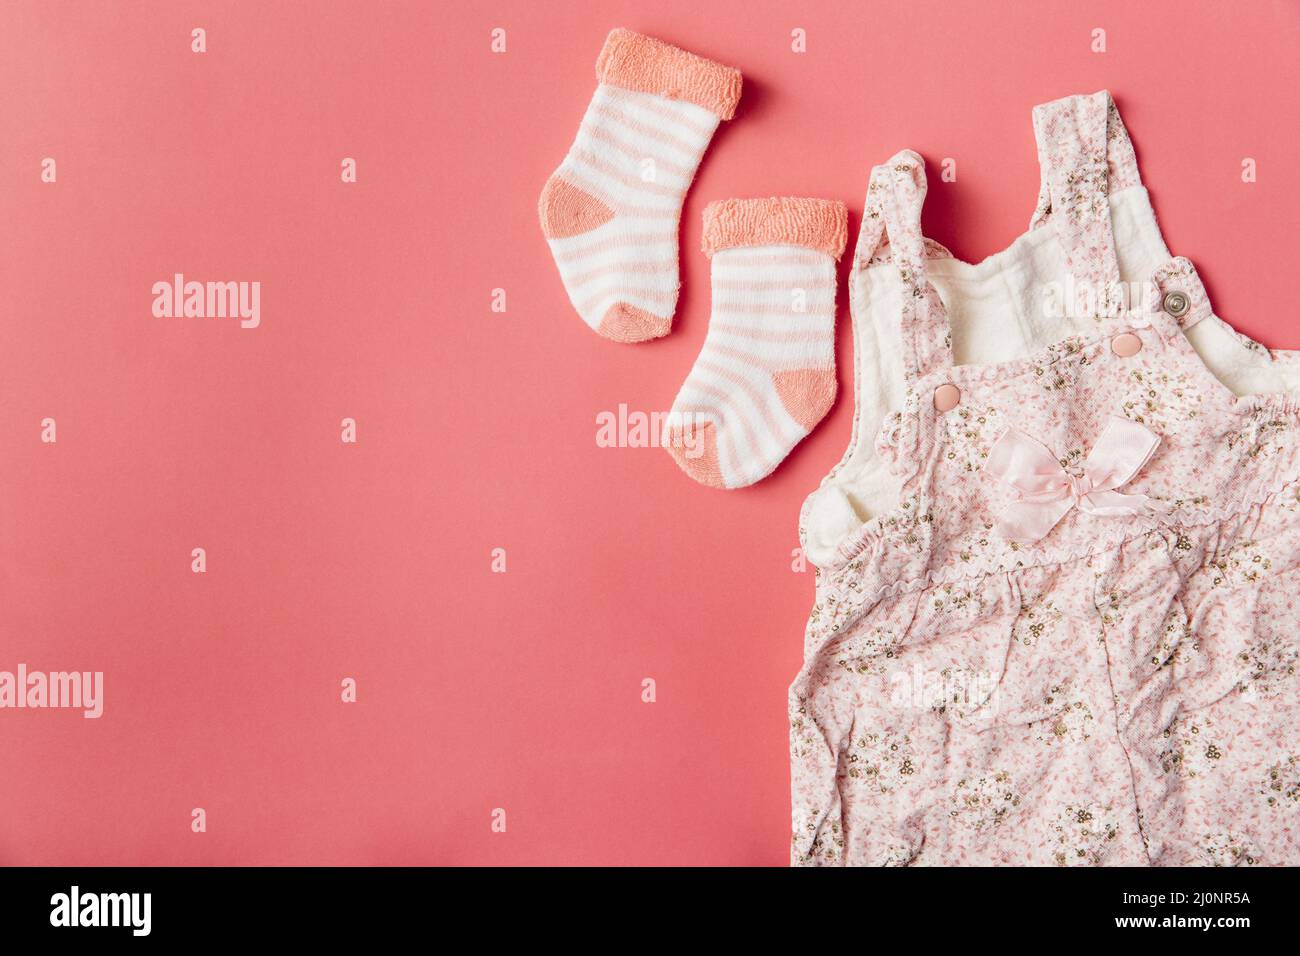 Pair sock baby dress bright colored background . High quality and resolution beautiful photo concept Stock Photo